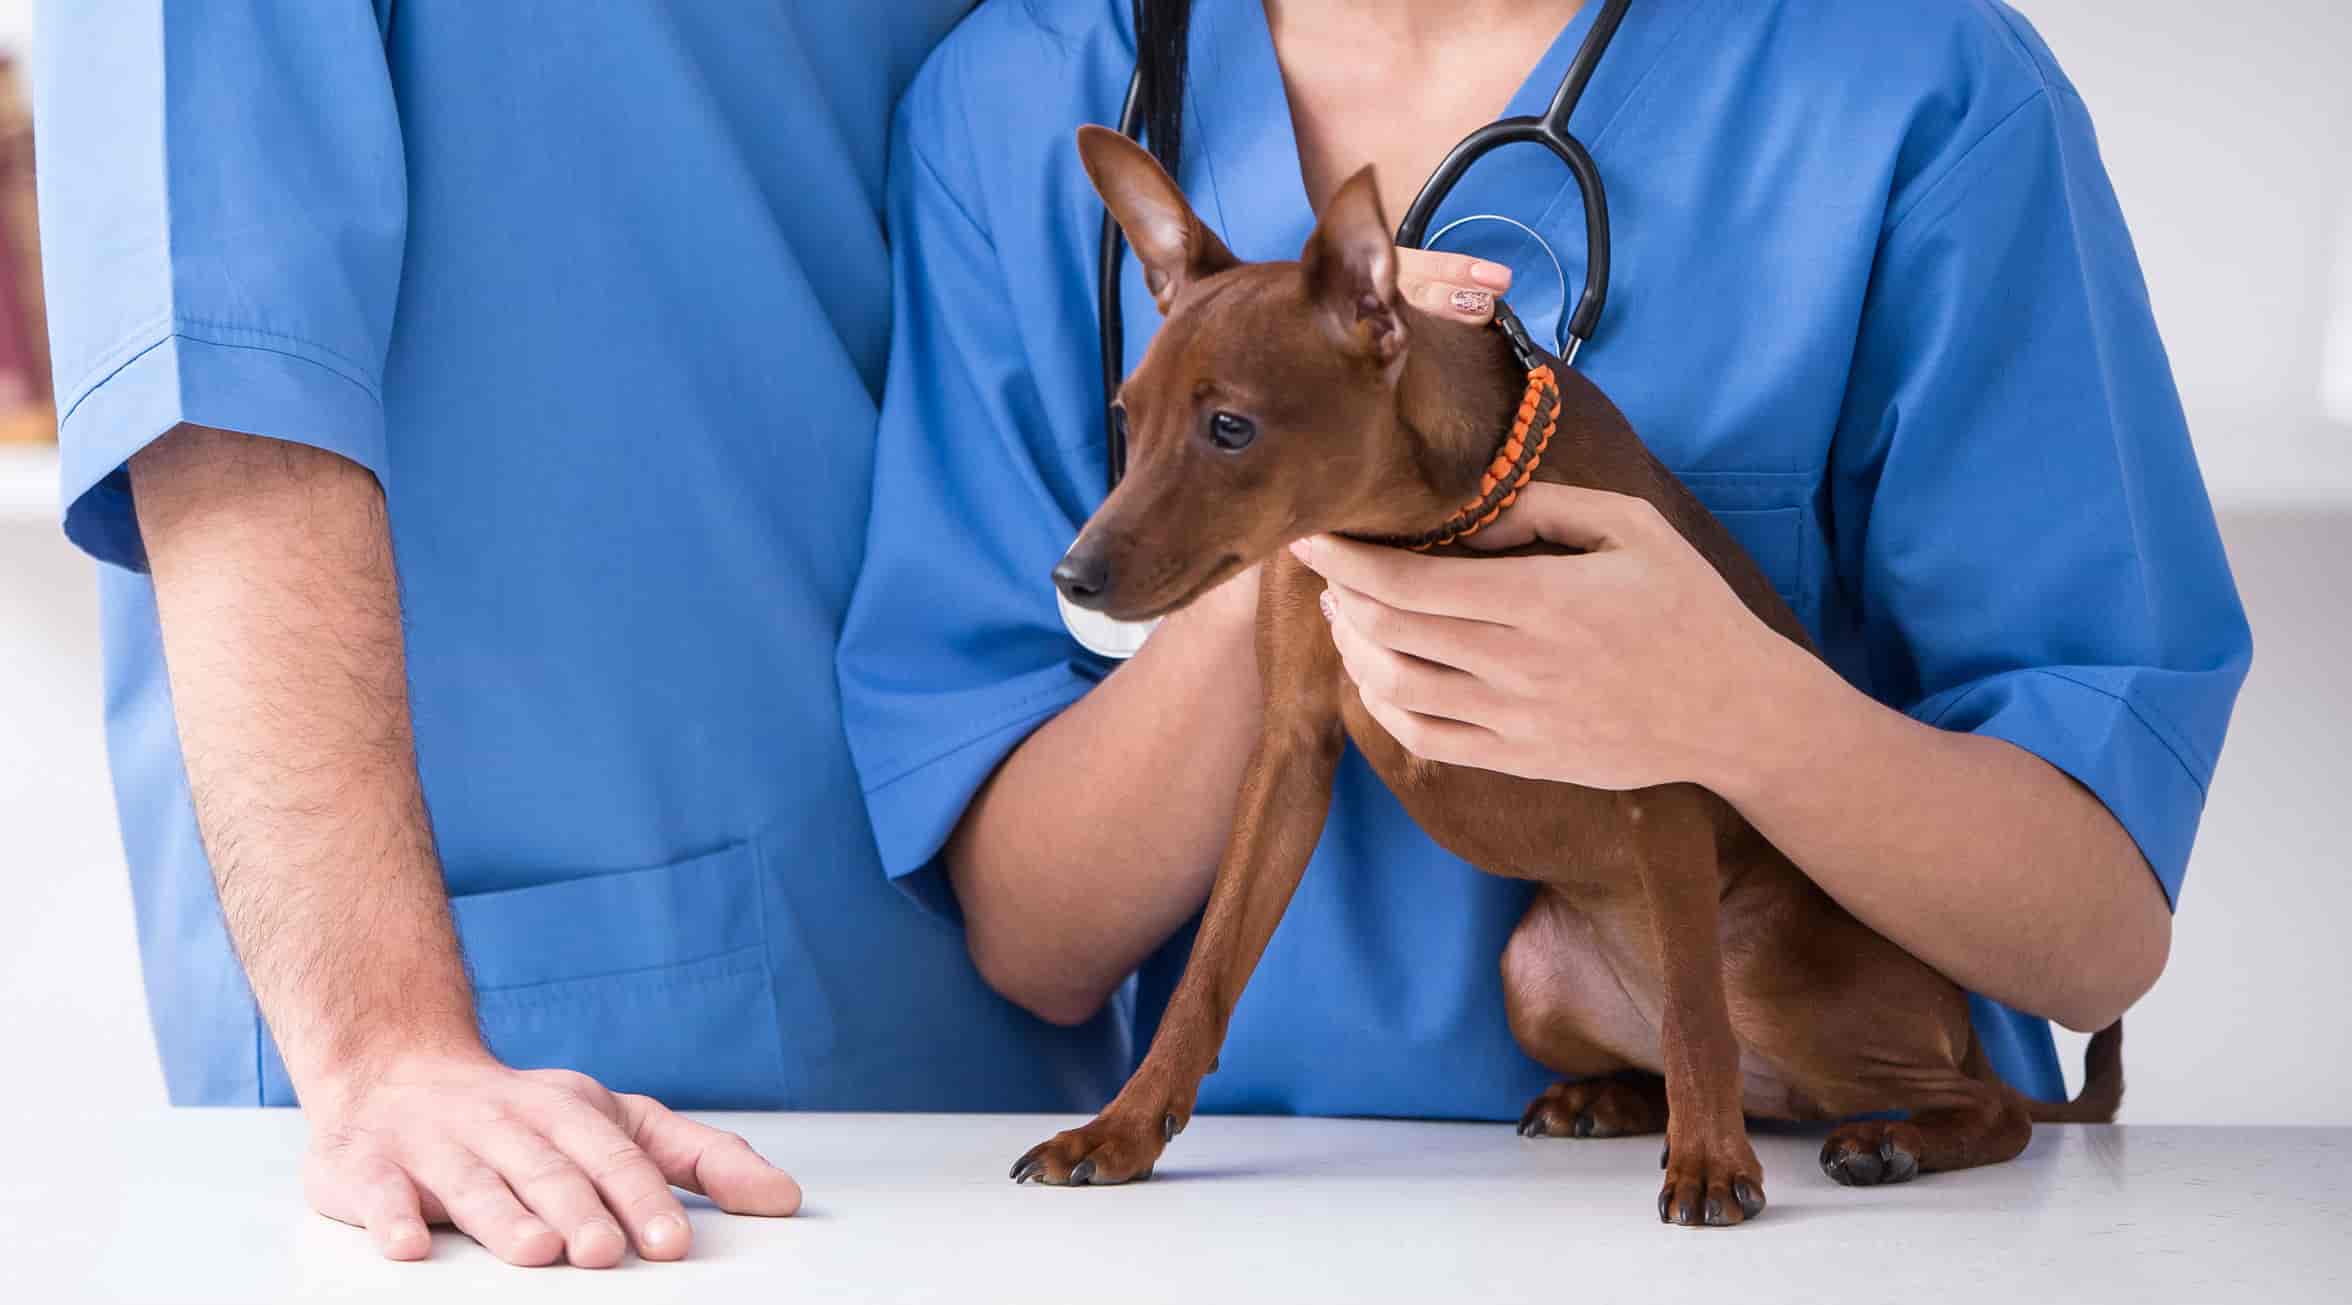 Is death one of the side effects of anesthesia in dogs?